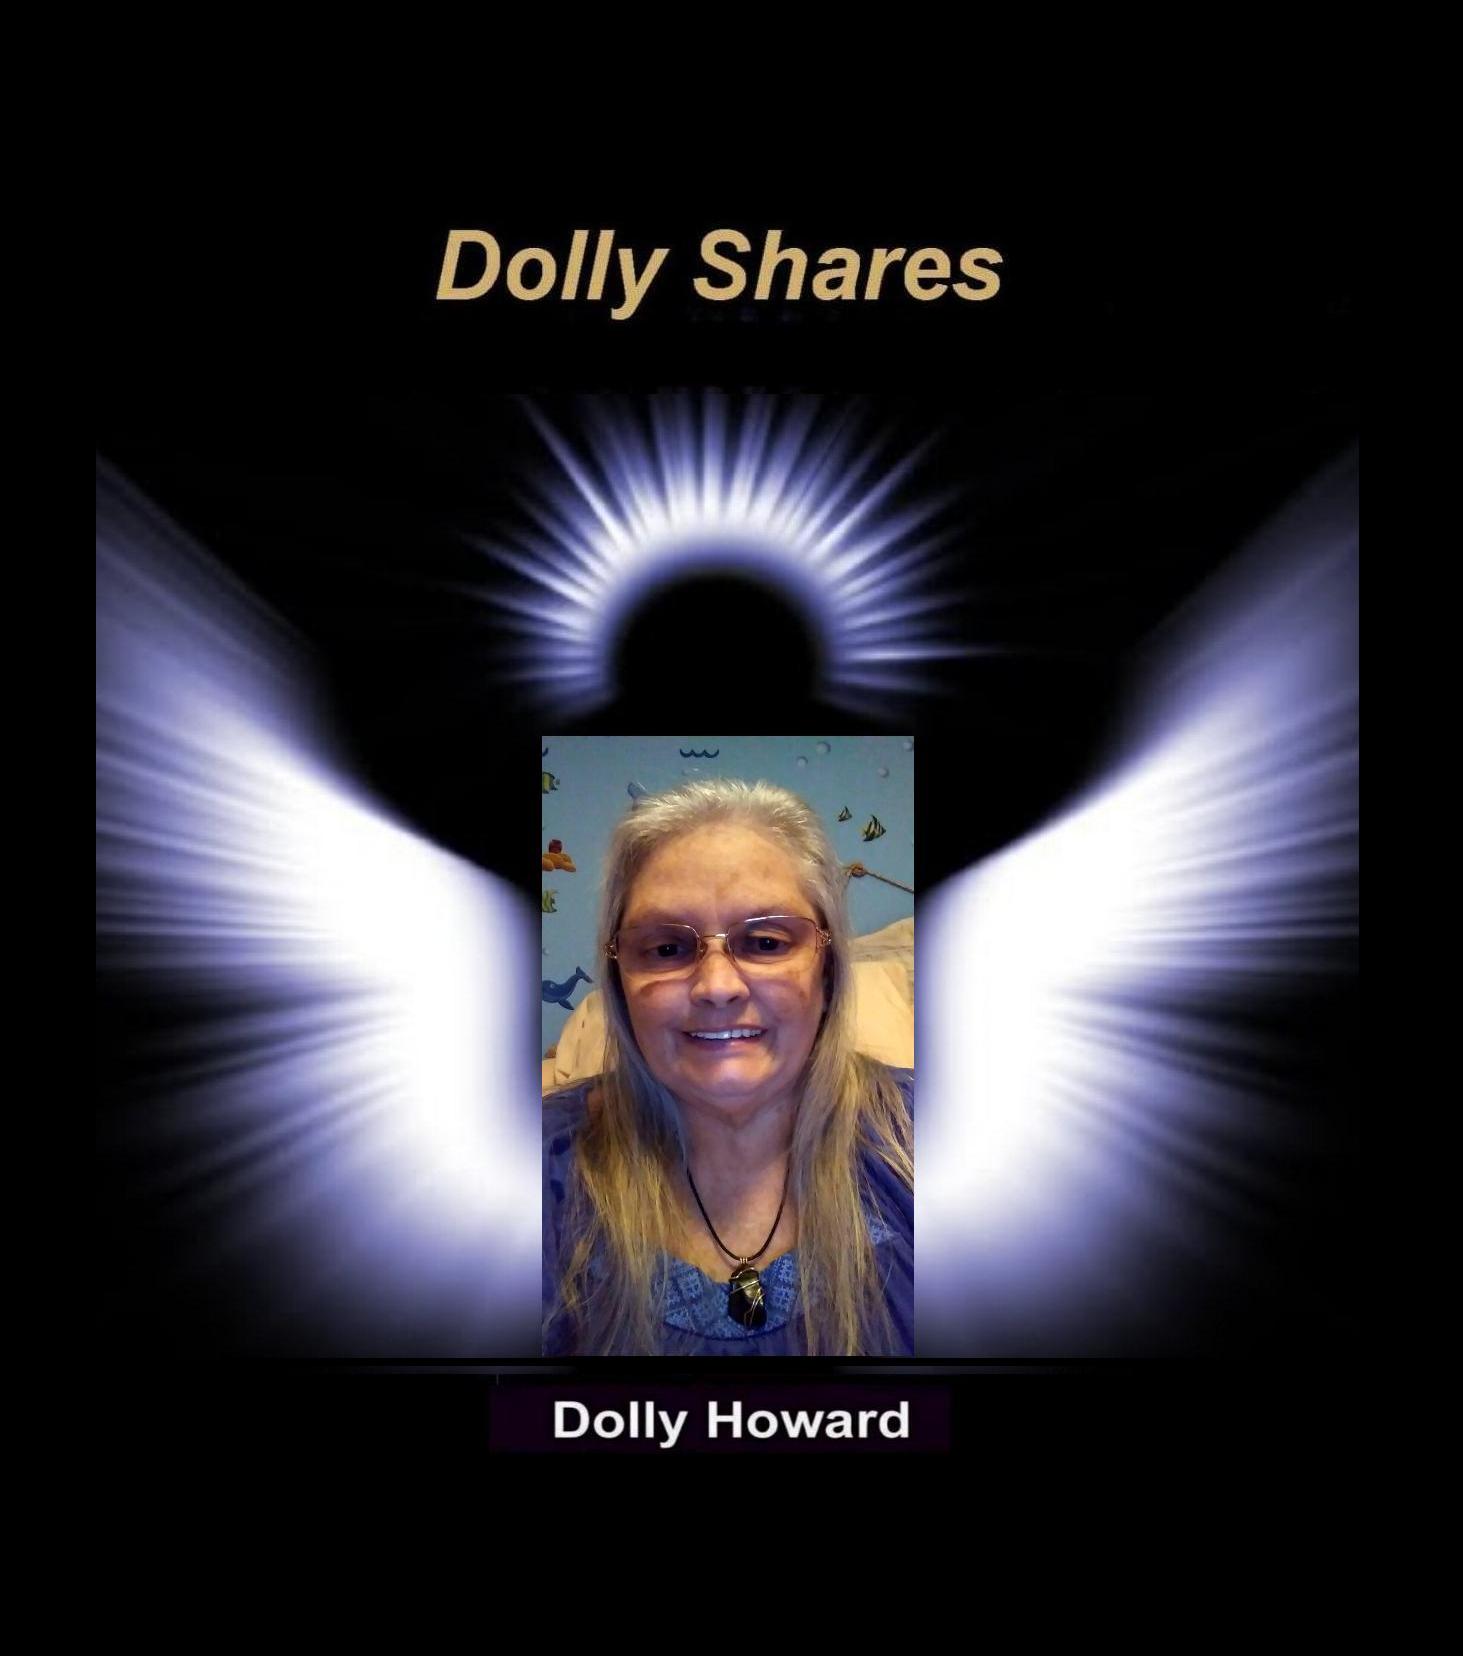 "DOLLY SHARES " with Dolly Howard – Sharing Encouraging Words 3-25-2020